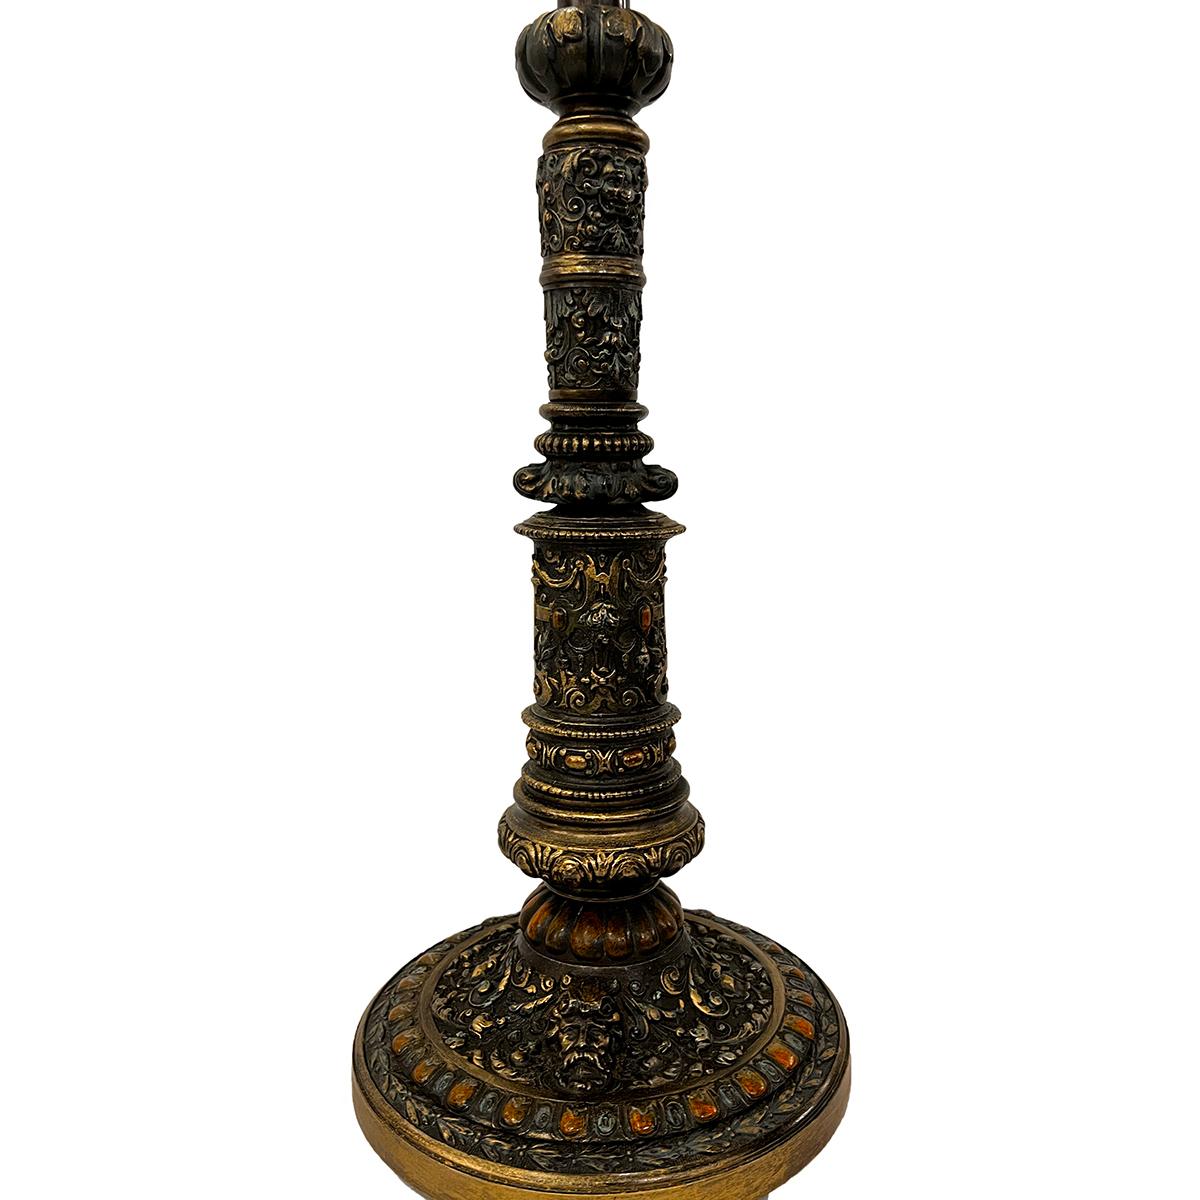 A late 19th century cast metal lamp with heraldic motif on body.

Measurements:
Height of body: 16